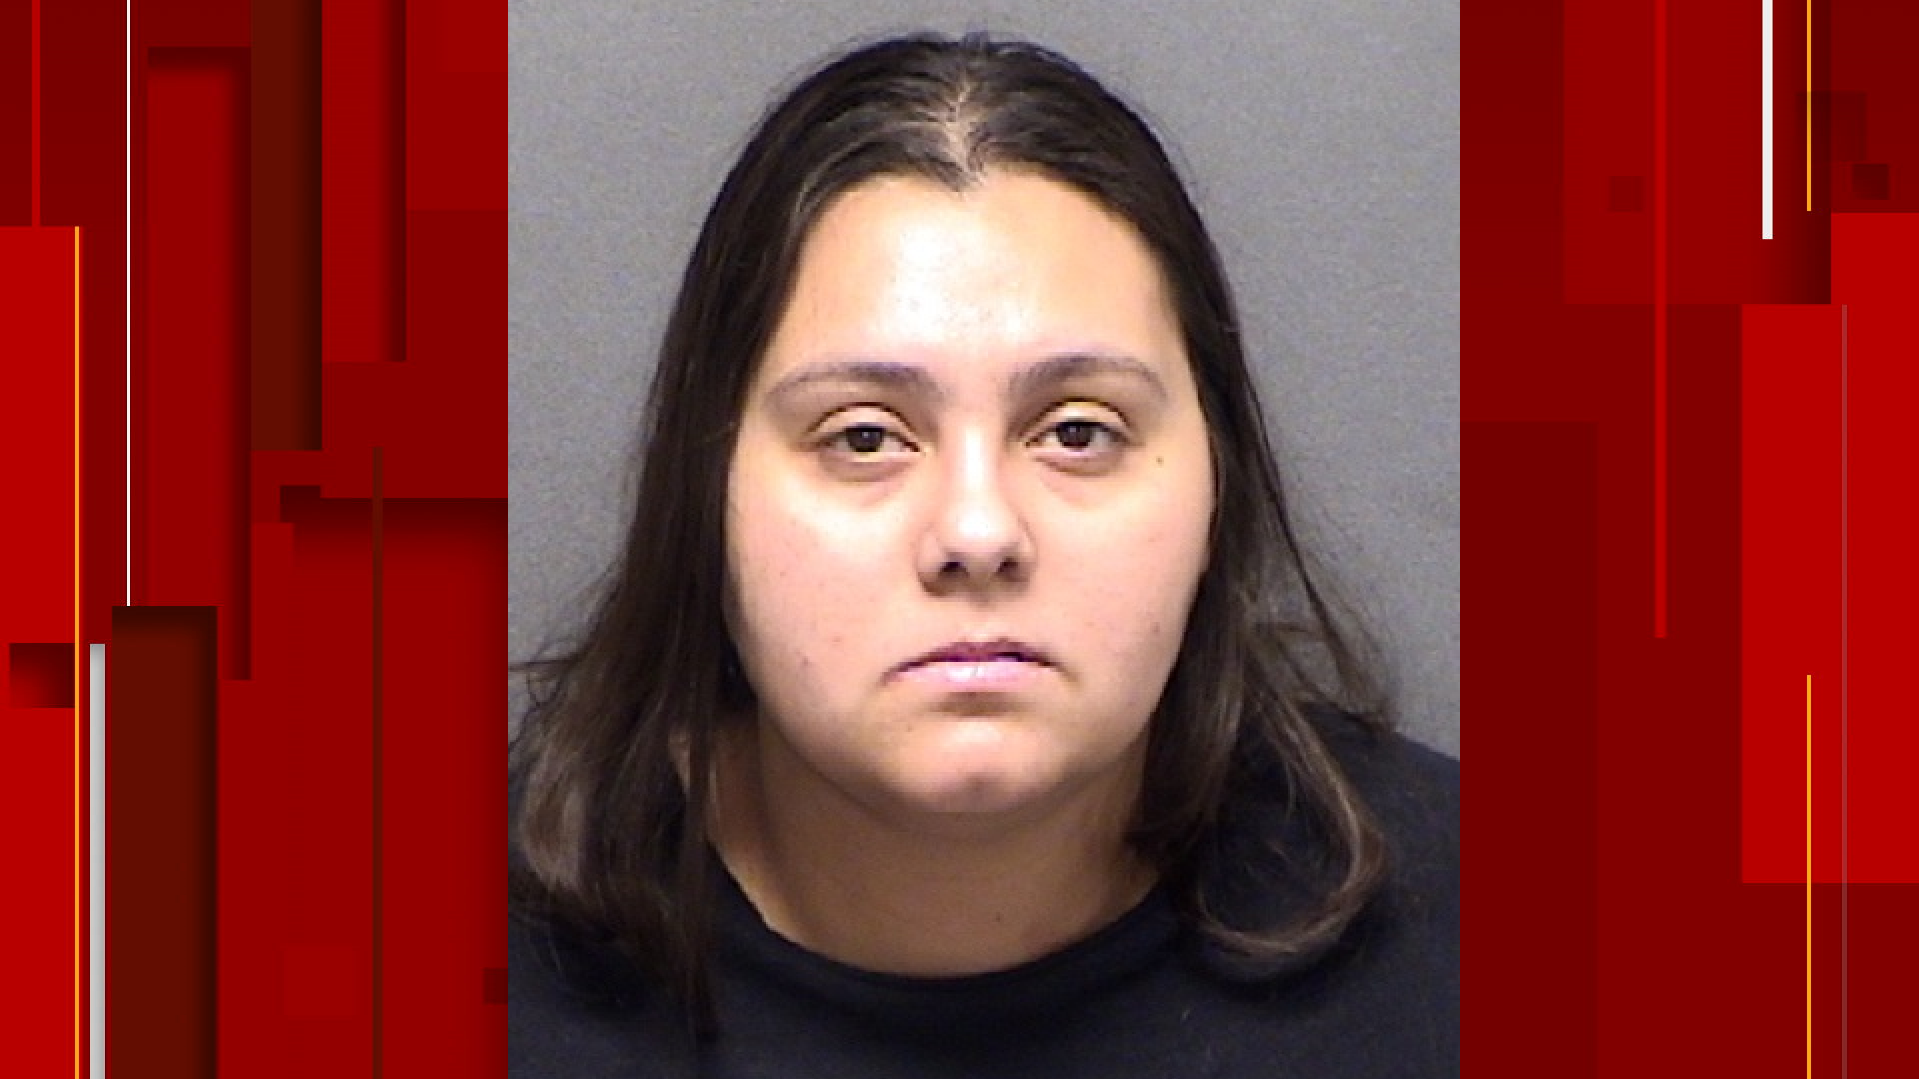 Woman facing manslaughter charge after man thrown from her SUV during ride at car meet-up pic